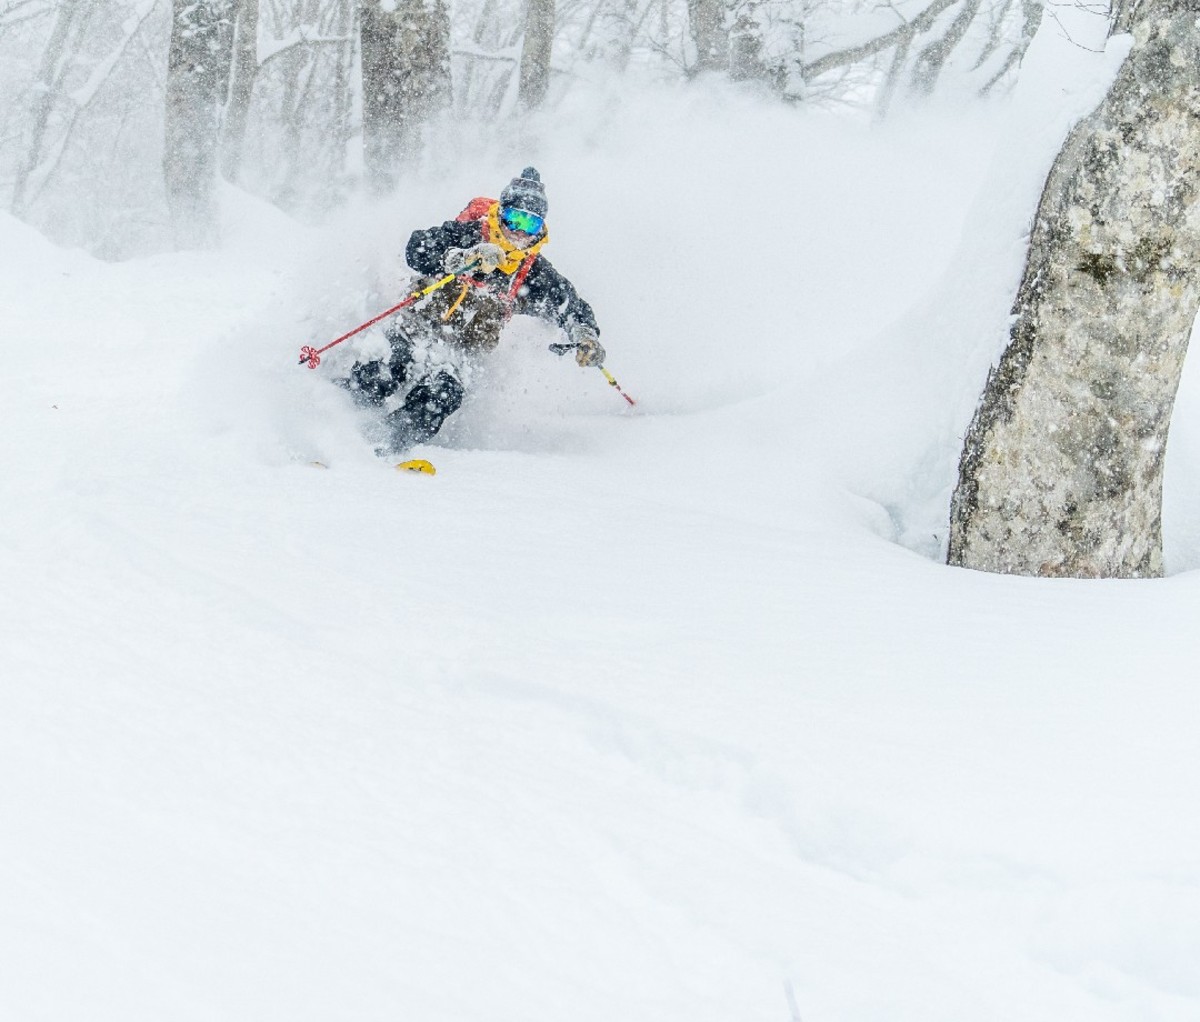 Skier heading down a deep powder glade in the Japanese Alps.